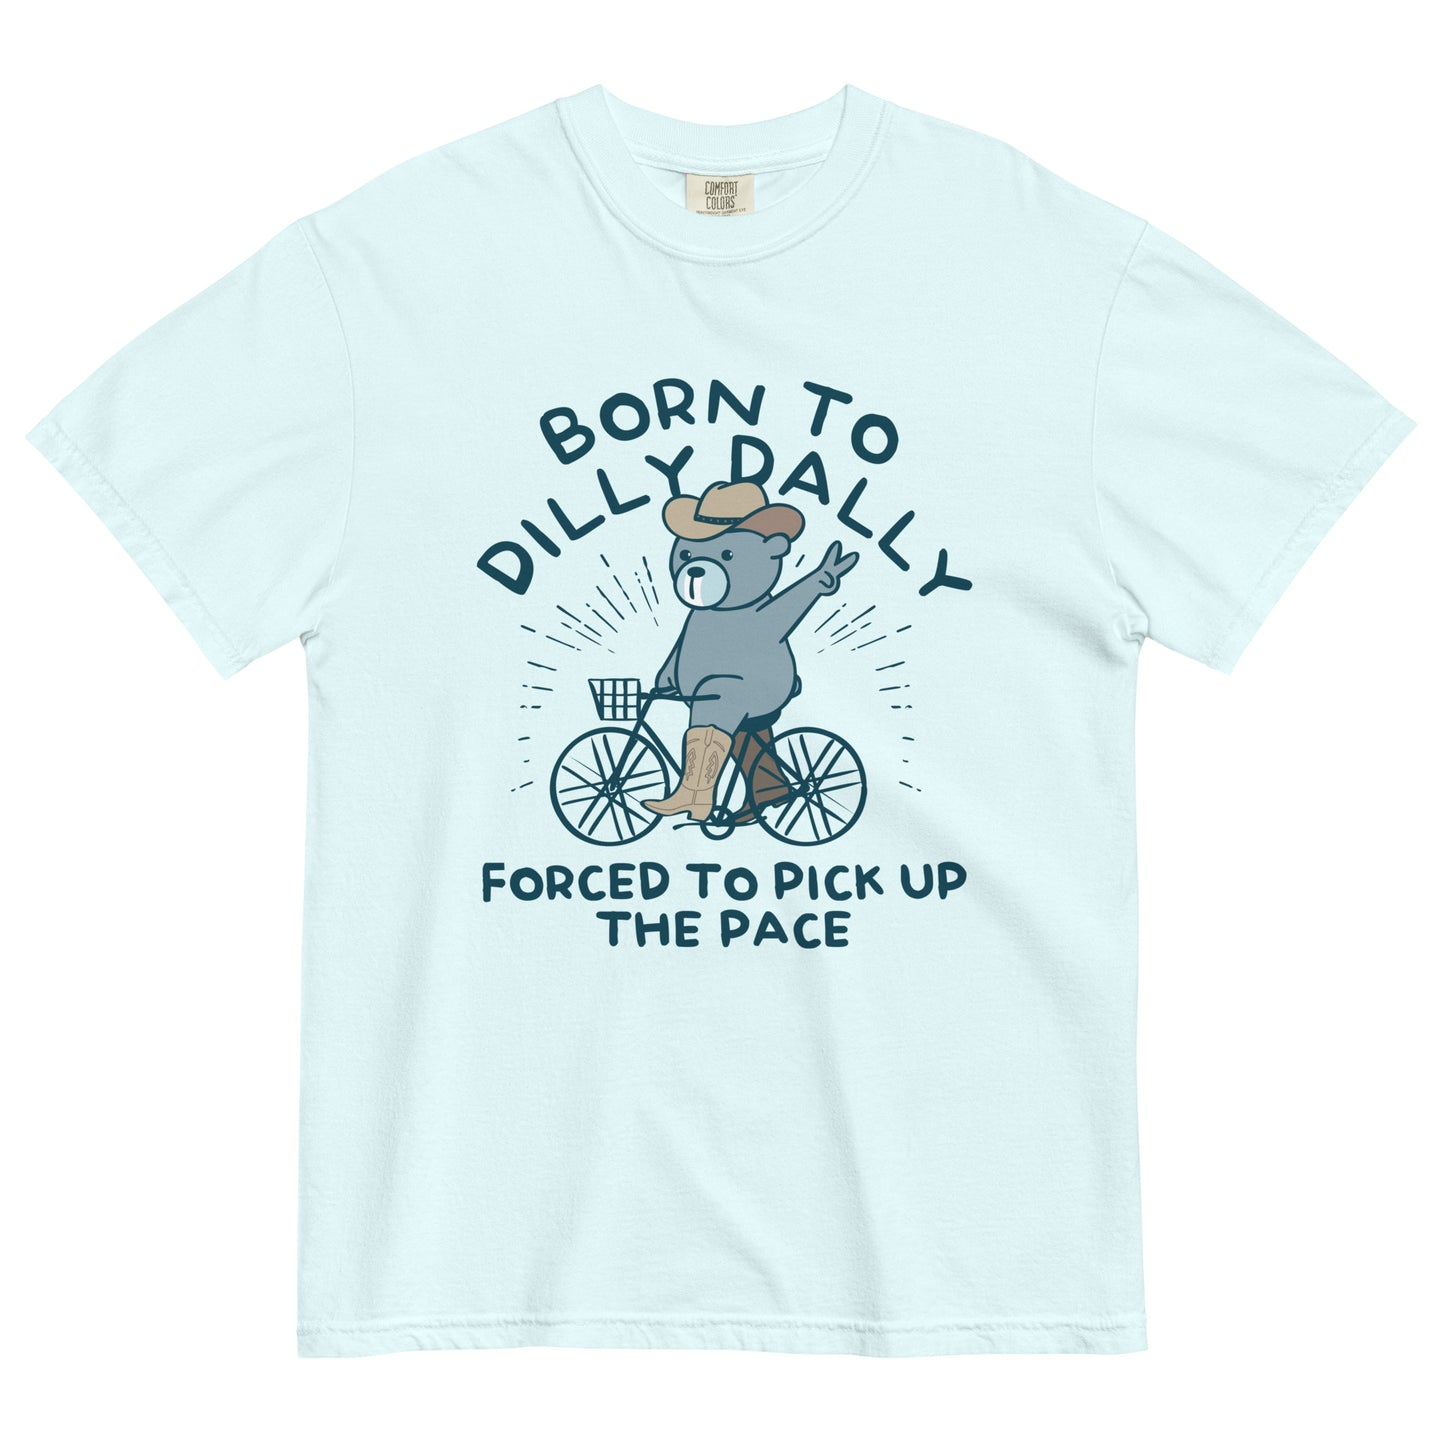 Born To Dilly Dally Forced To Pick Up The Pace Men's Relaxed Fit Tee